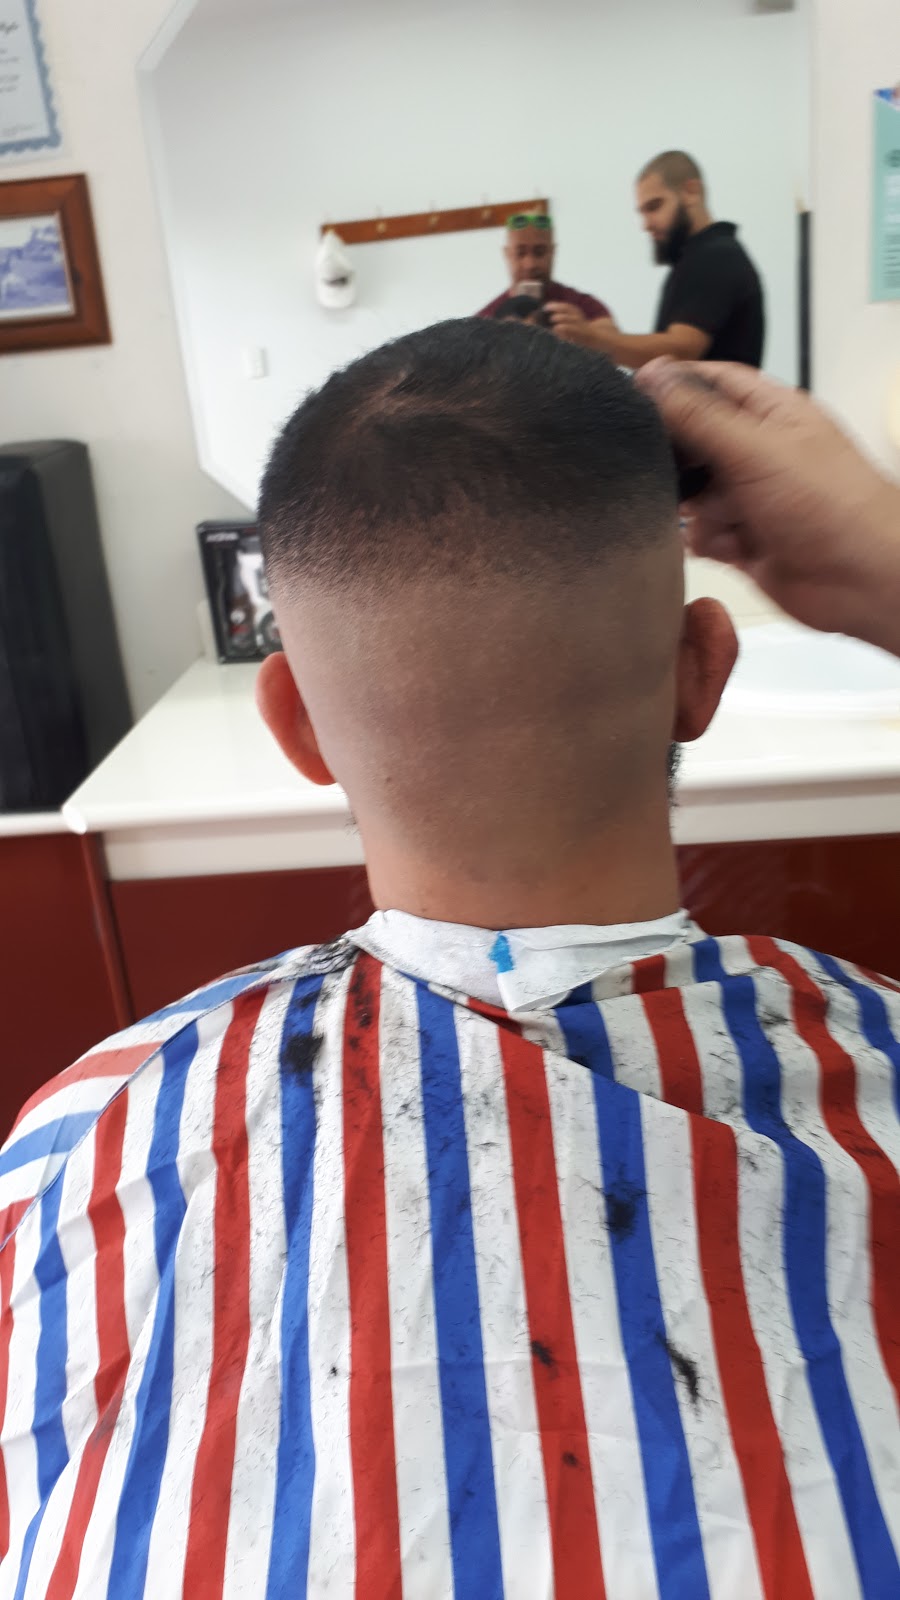 Tahas Barber | hair care | 182 Waldron Rd, Chester Hill NSW 2162, Australia | 0404956600 OR +61 404 956 600